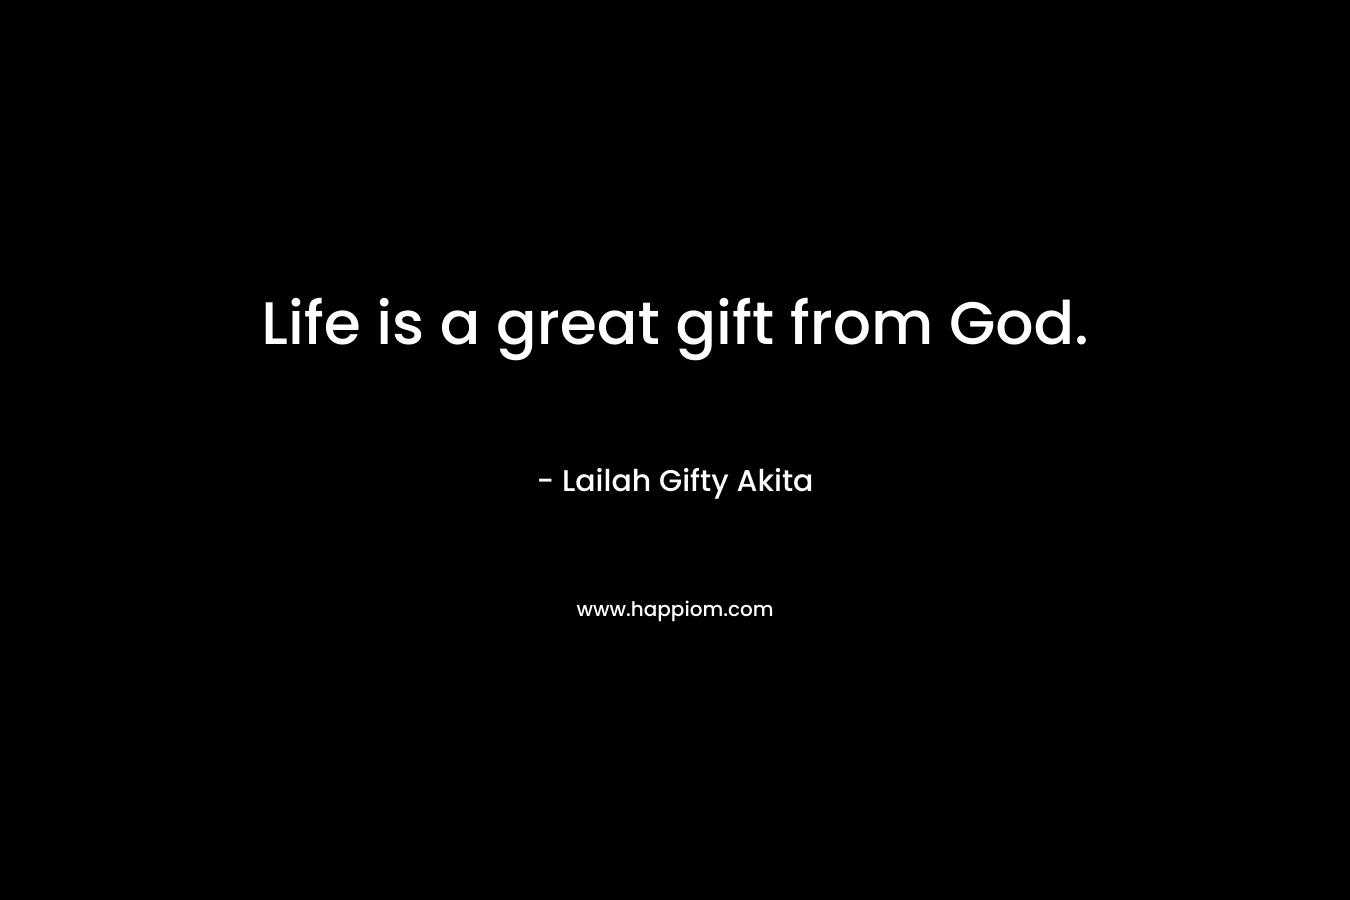 Life is a great gift from God.